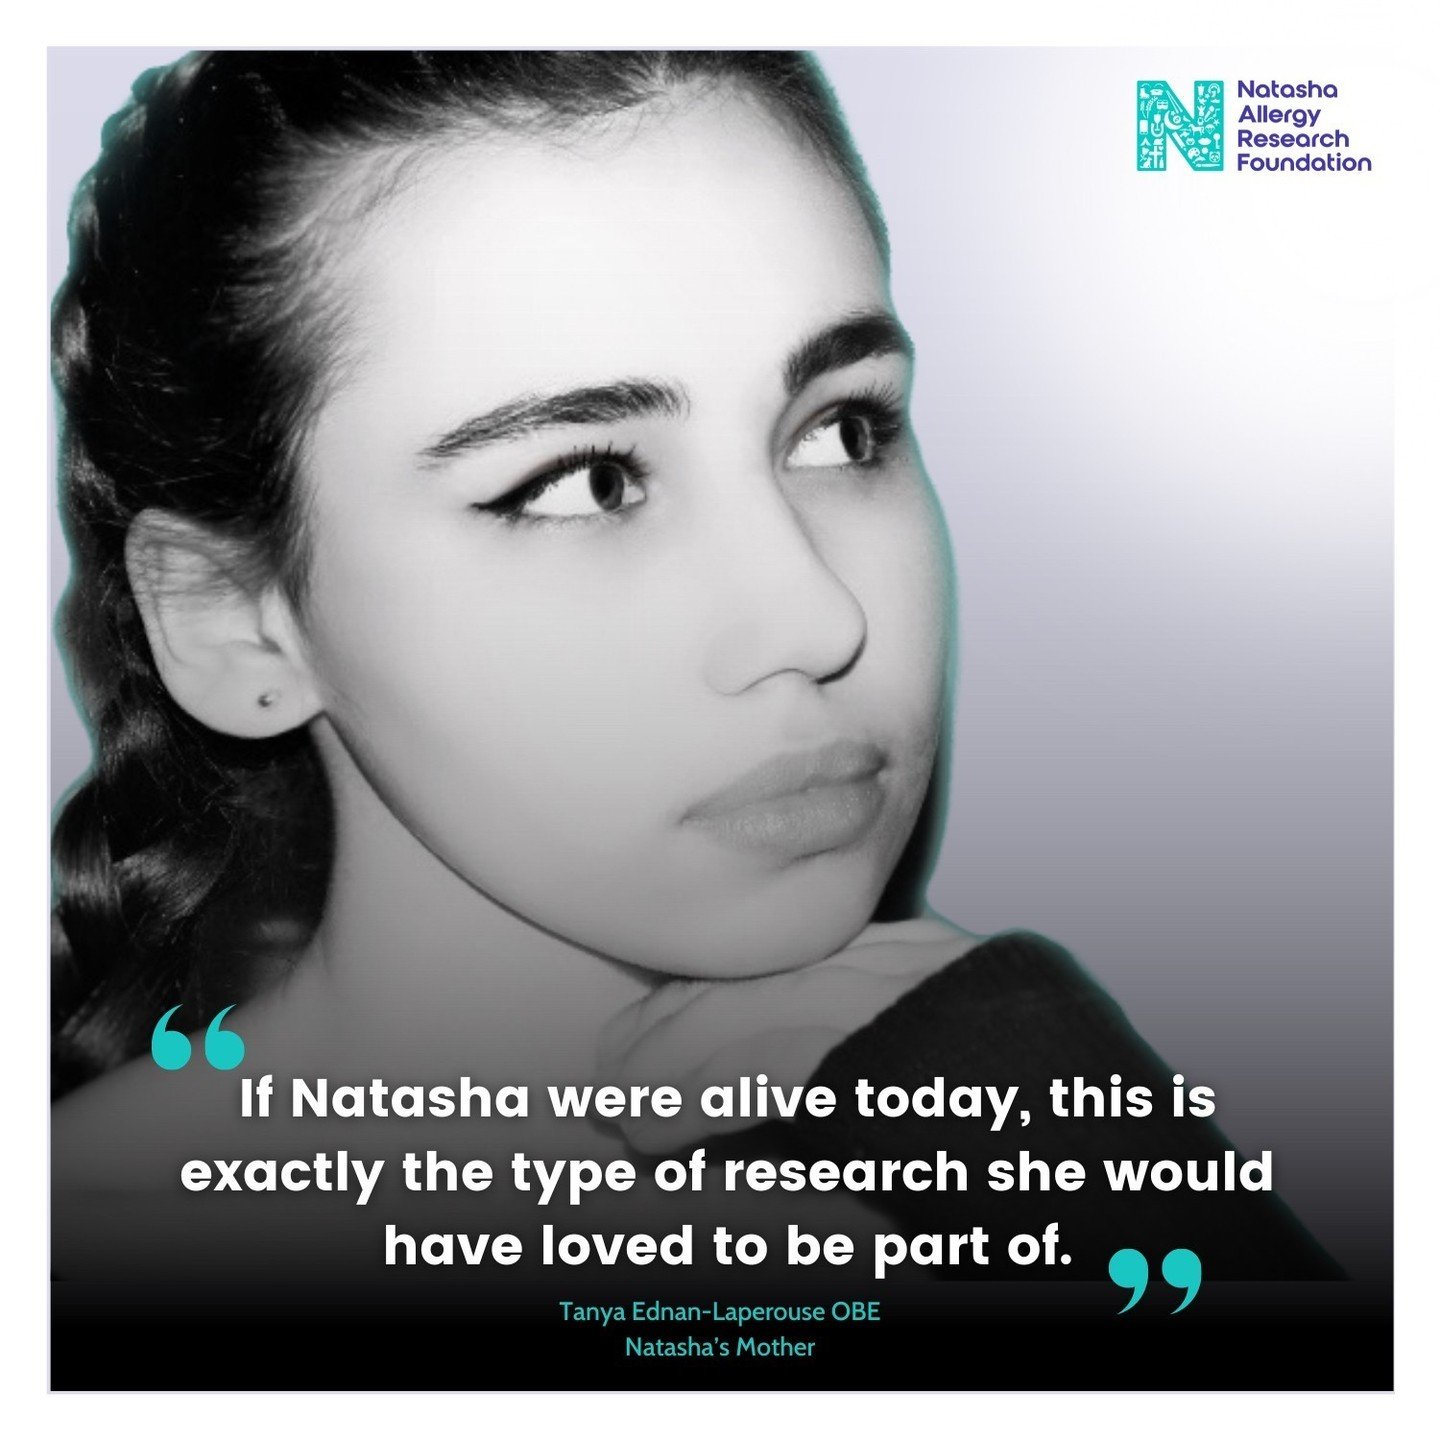 When Natasha was one year old, I read about a seminar being held in London titled, Current Medical Research into Food Allergies. That immediately got my attention. At the time, I was reeling from the shock of 2 life-threatening #allergic reactions (a